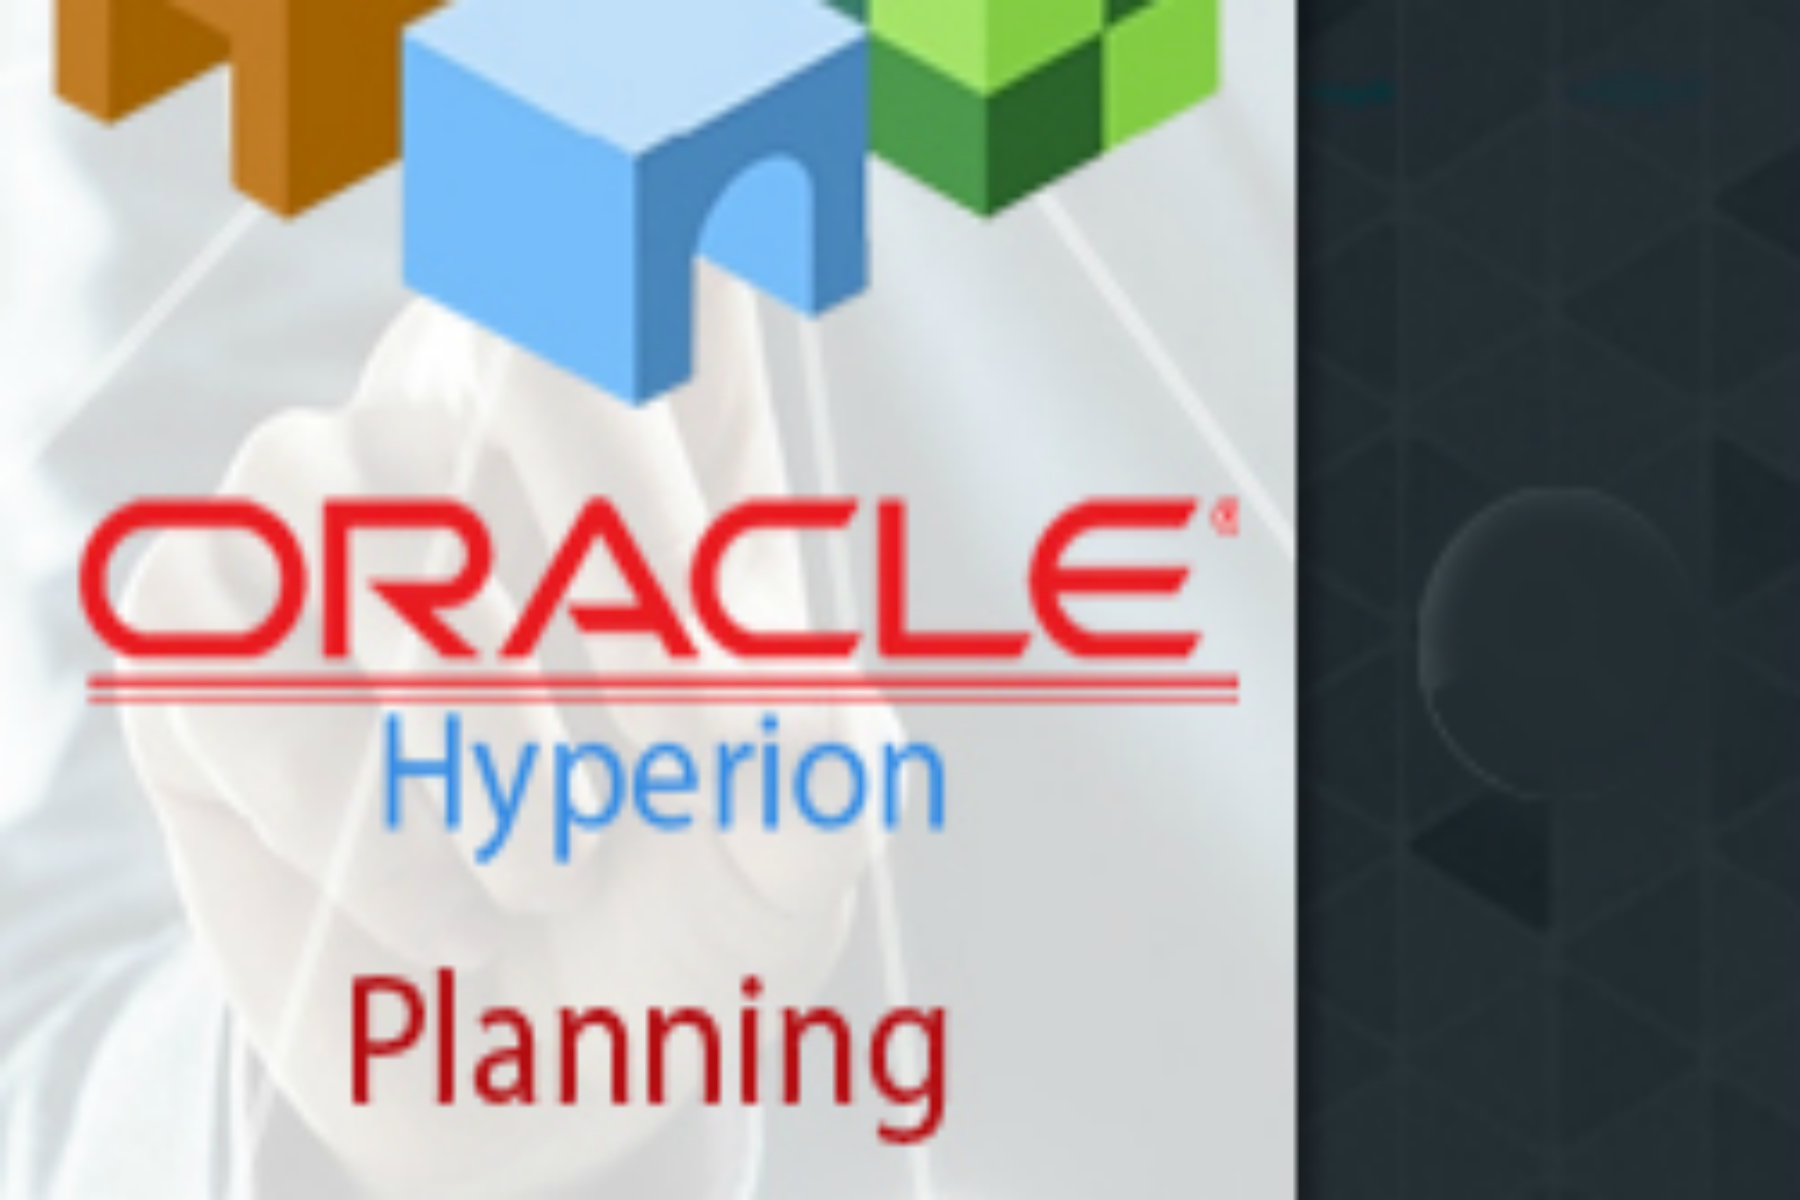 Hyperion Planning Training in Chennai